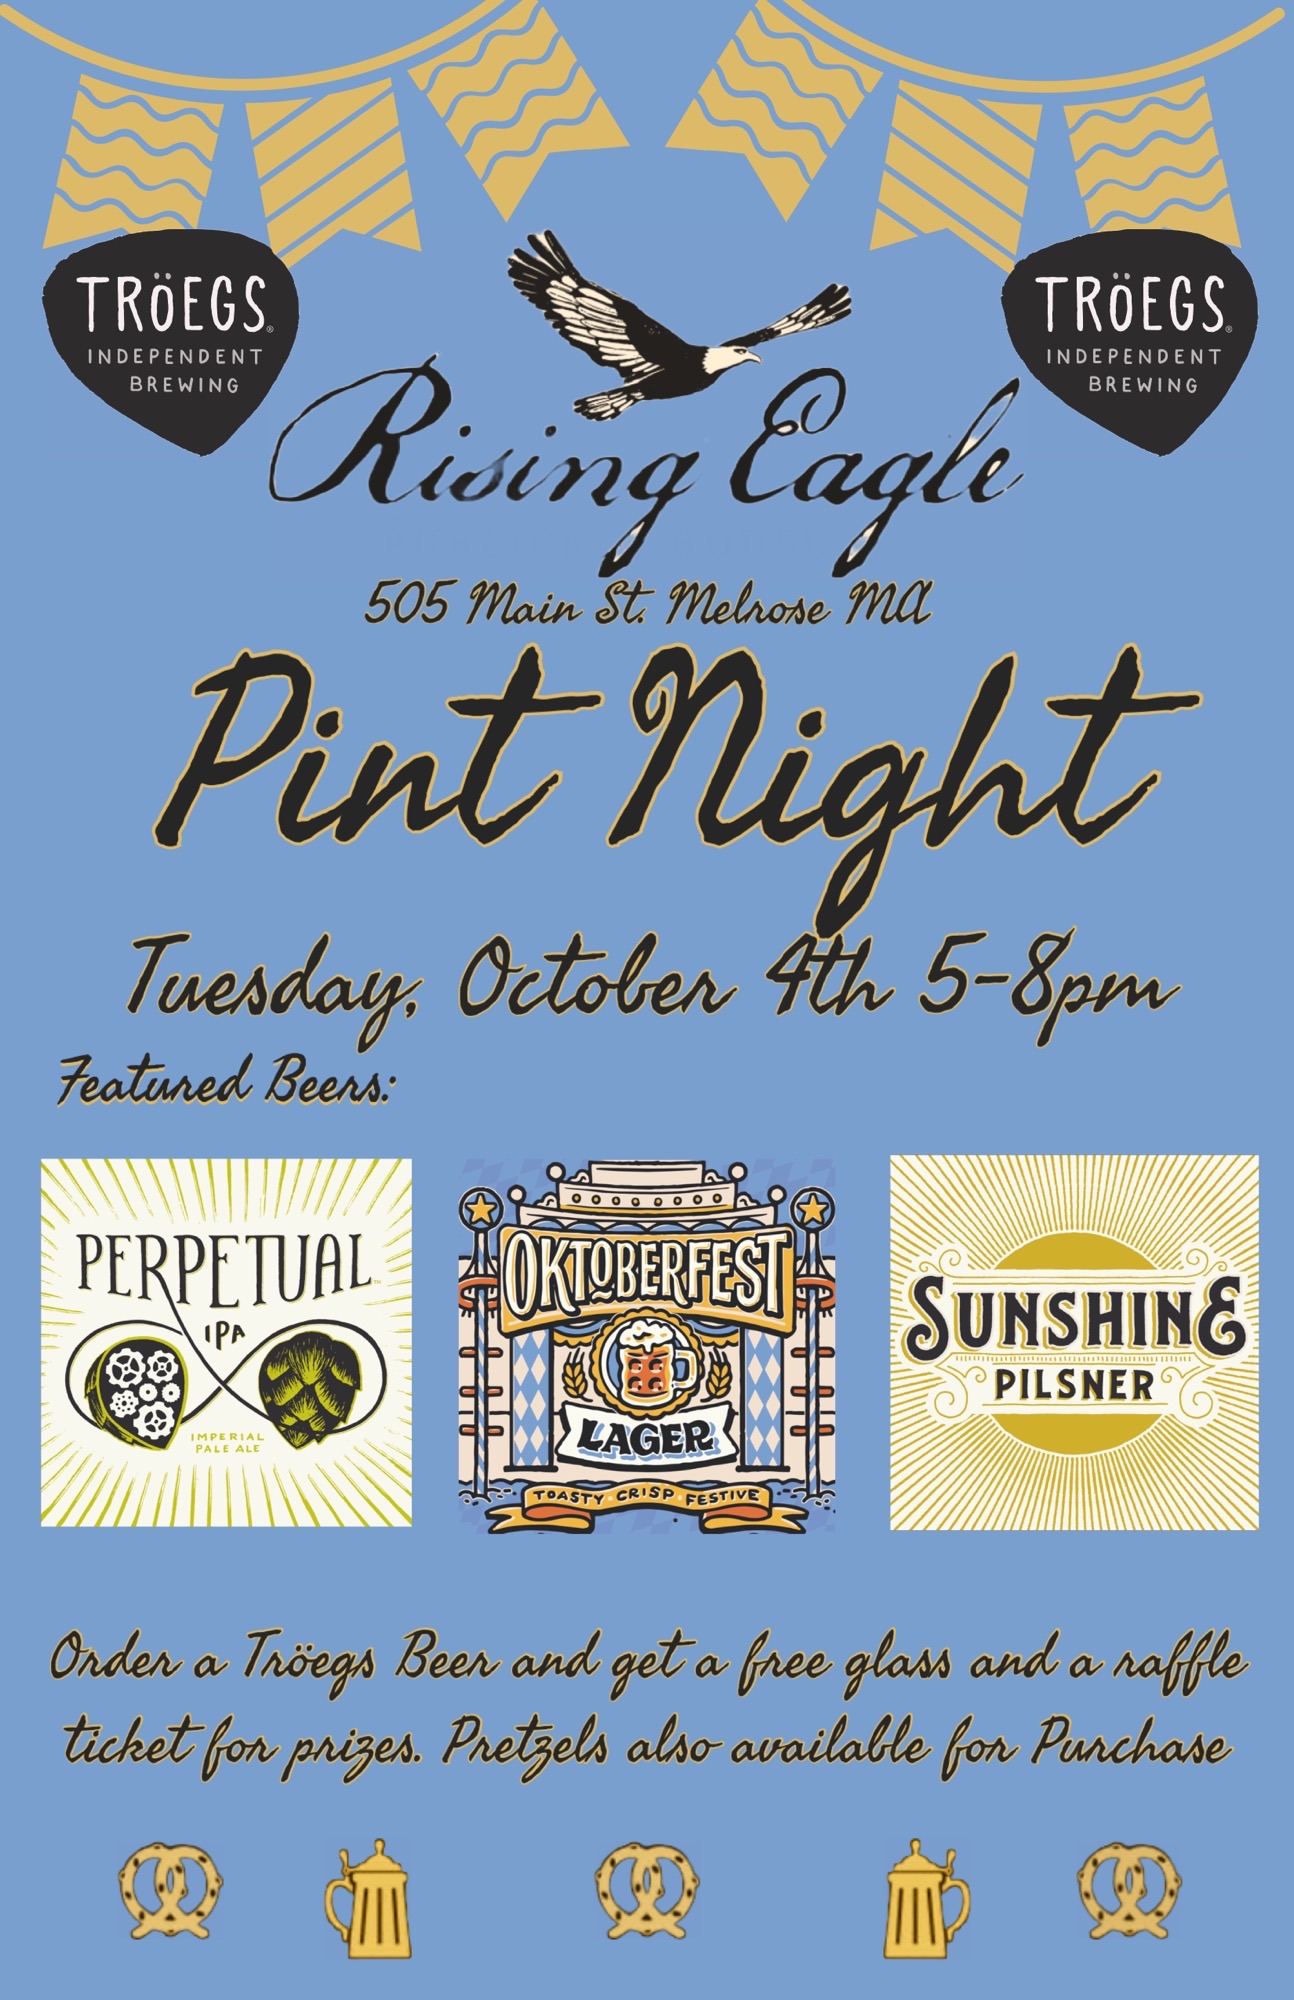 Tröegs Pint Night @ Rising Eagle Publick House